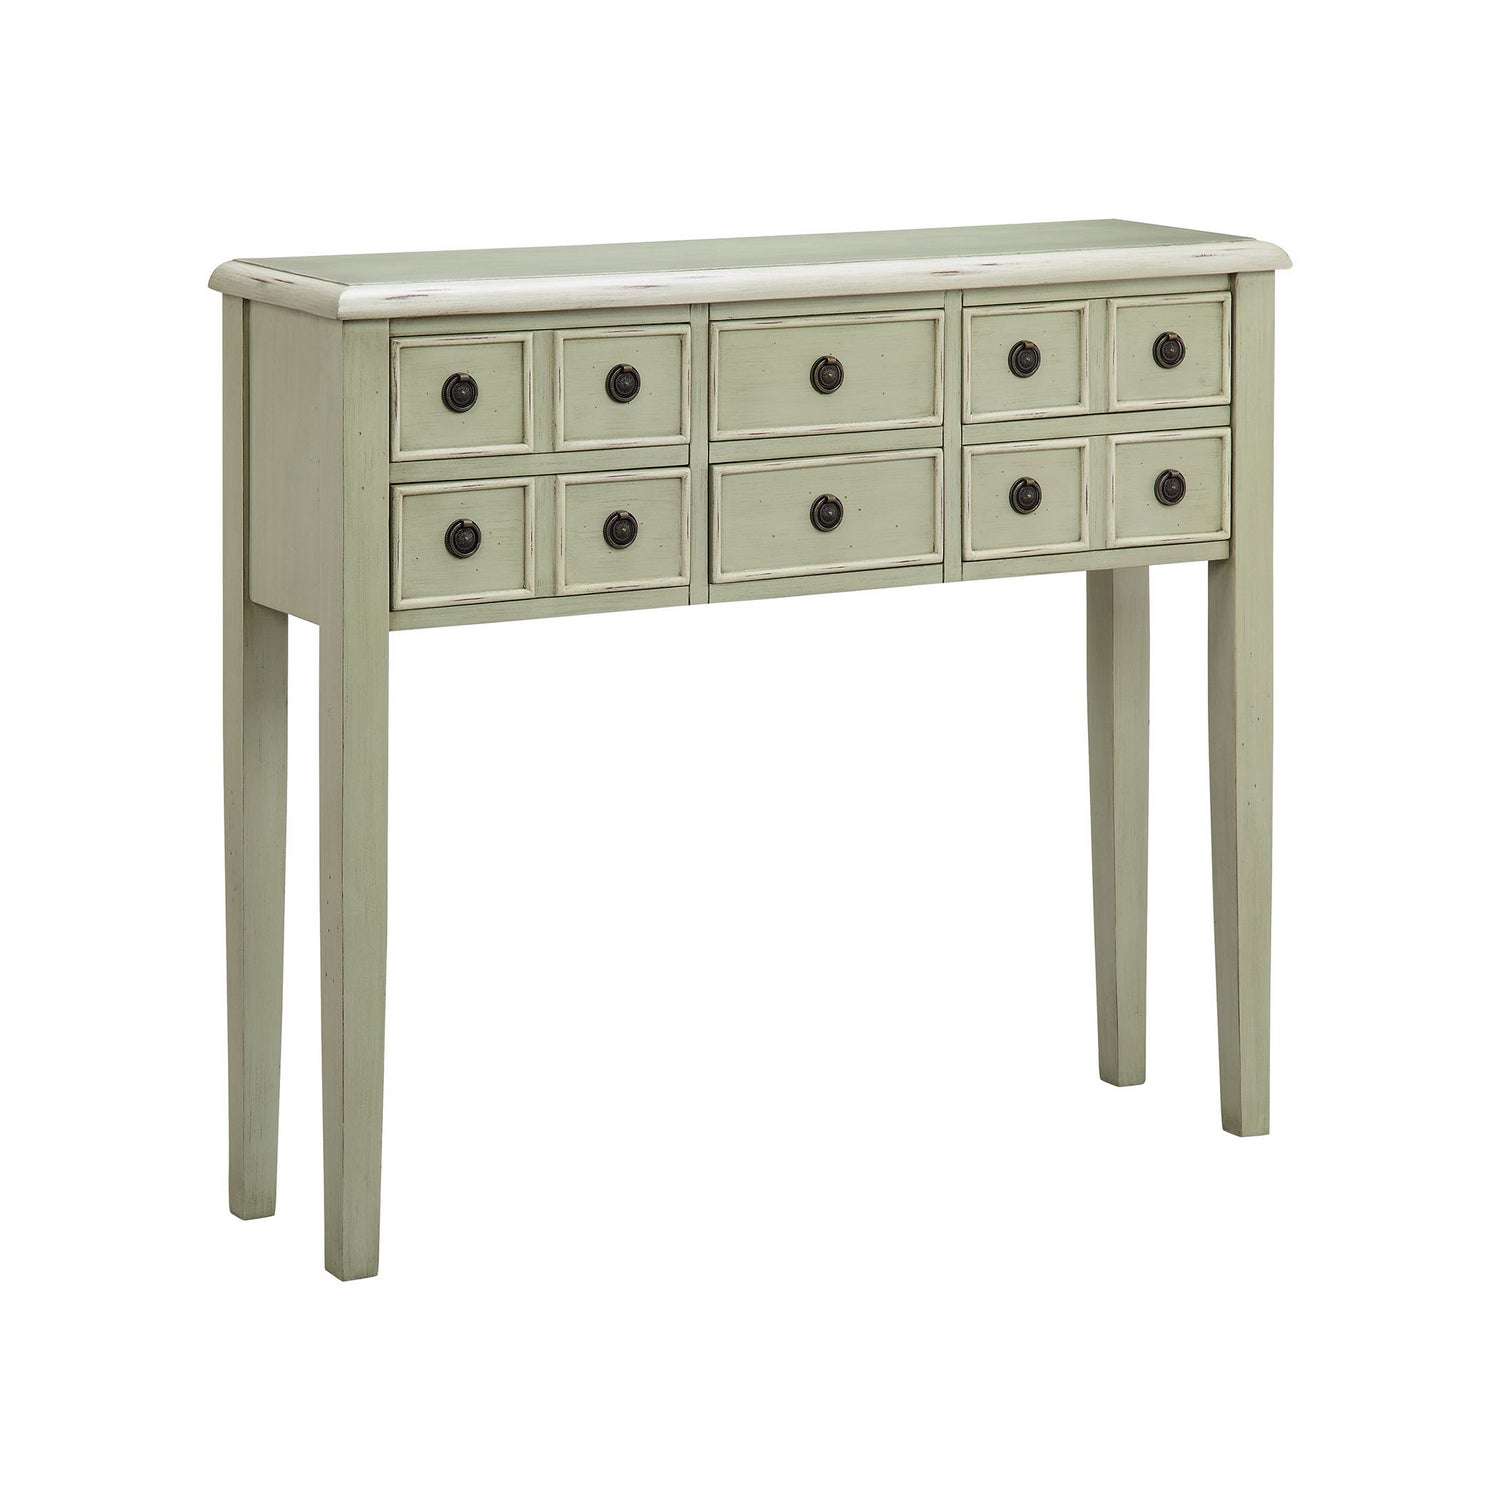 ELK Home - 28270 - Console Table - Chesapeake - Antique Green